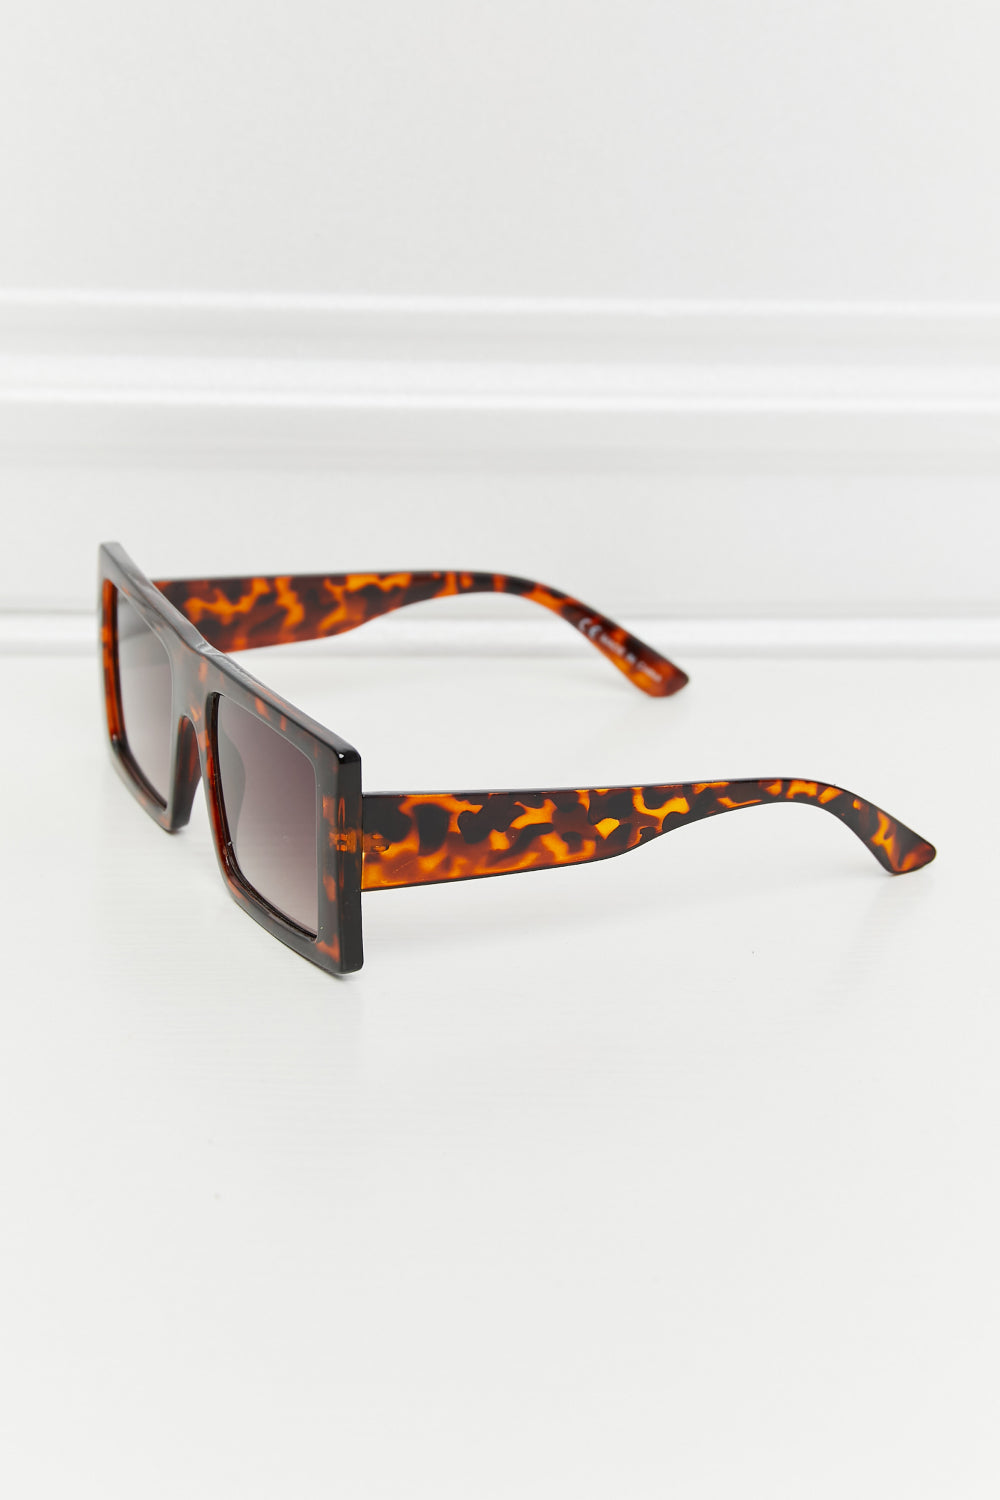 Square Polycarbonate Sunglasses - Tangerine / One Size Wynter 4 All Seasons